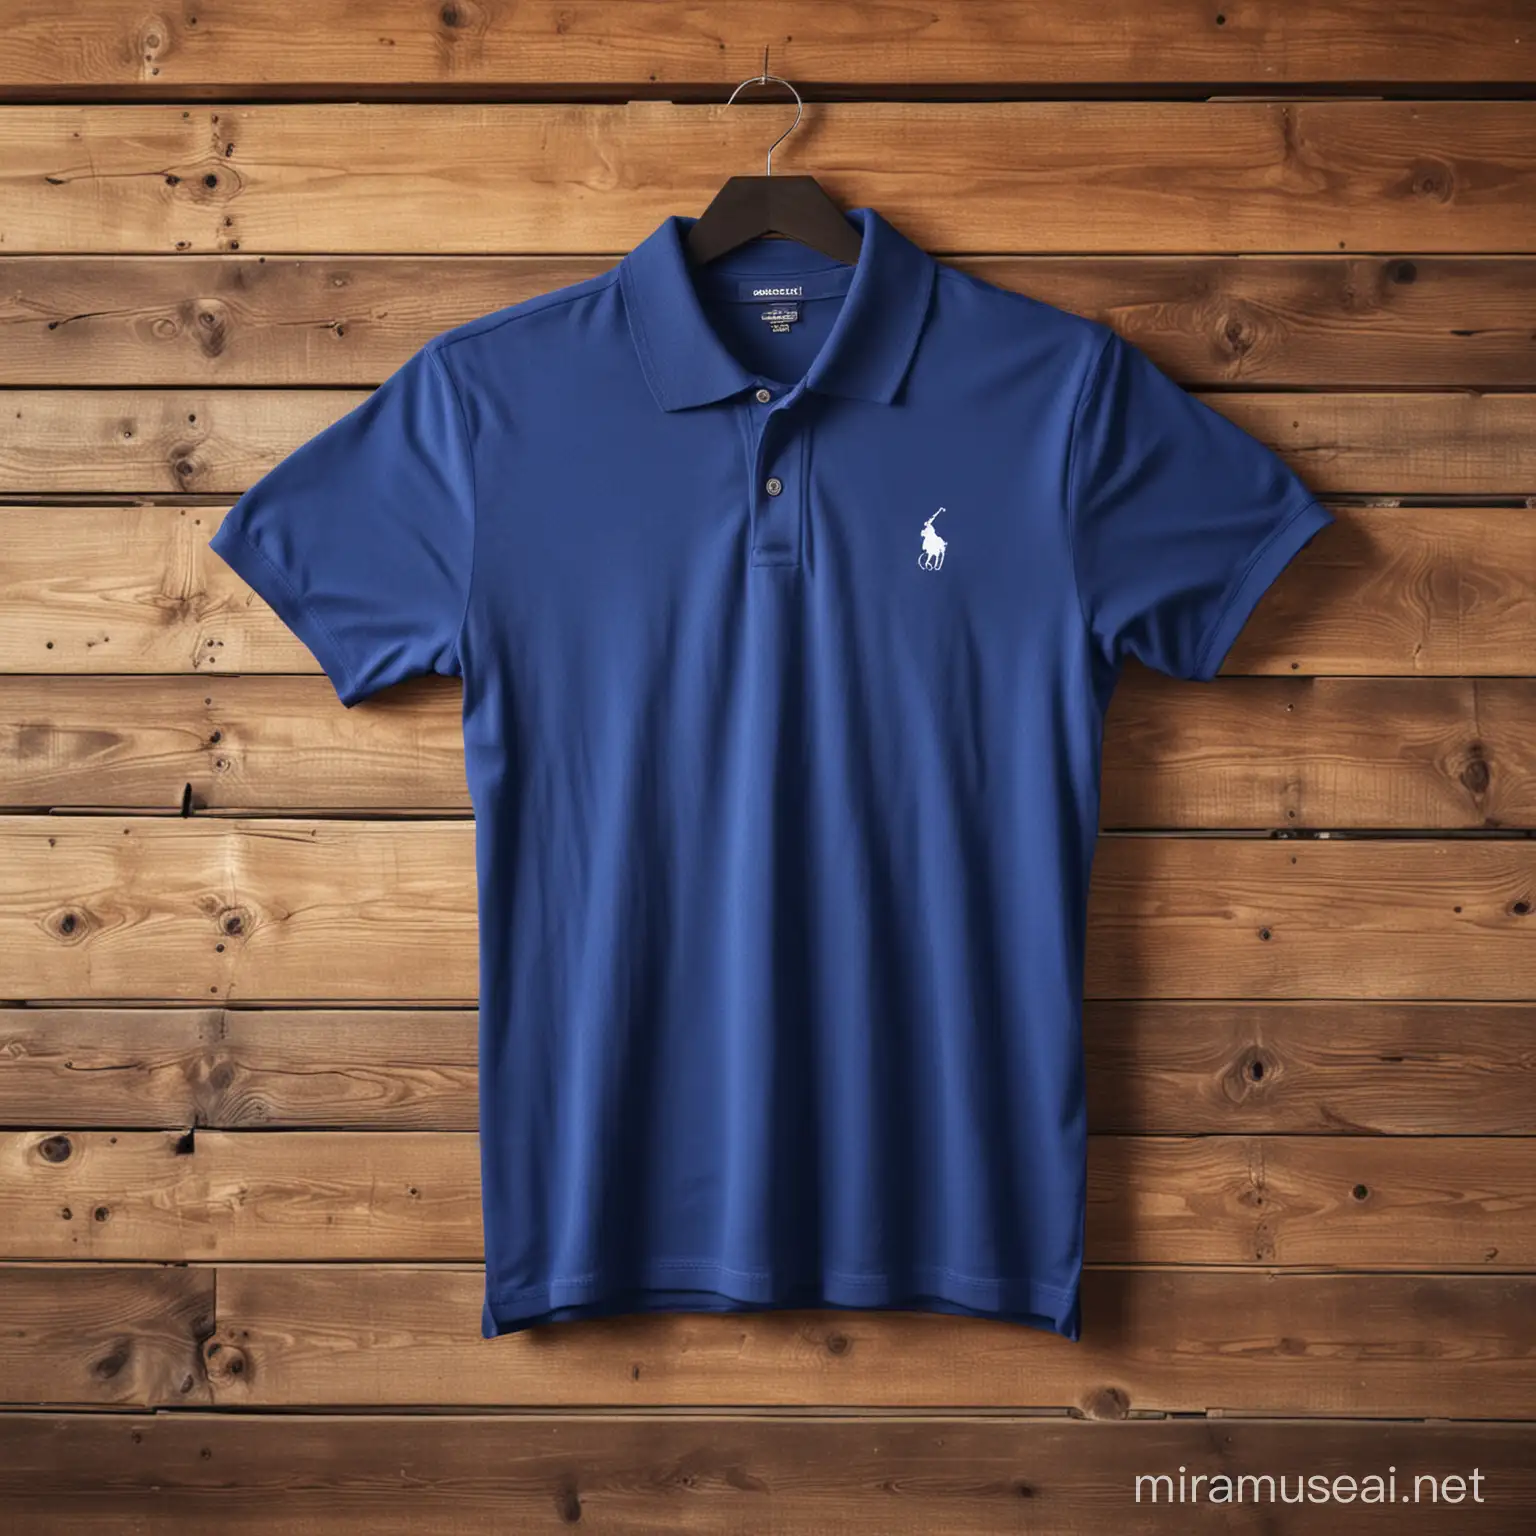 Royal Blue Polo Shirt Displayed on Rustic Wooden Wall